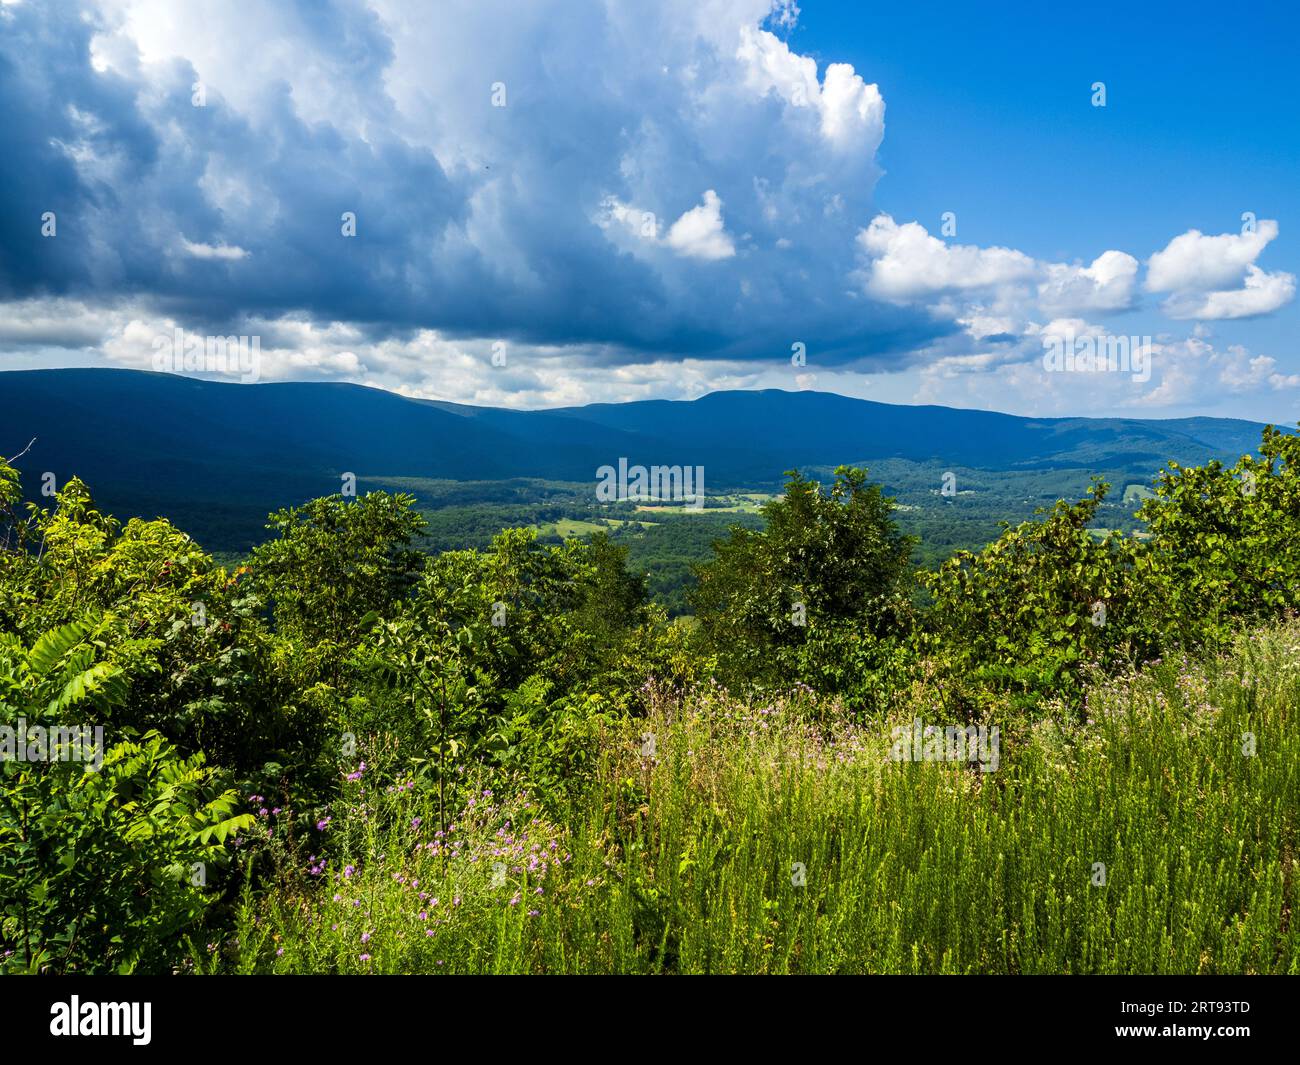 Shenandoah Valley Vista from Shenandoah National Park, Virginia, USA, with Approaching Dramatic Clouds. Stock Photo